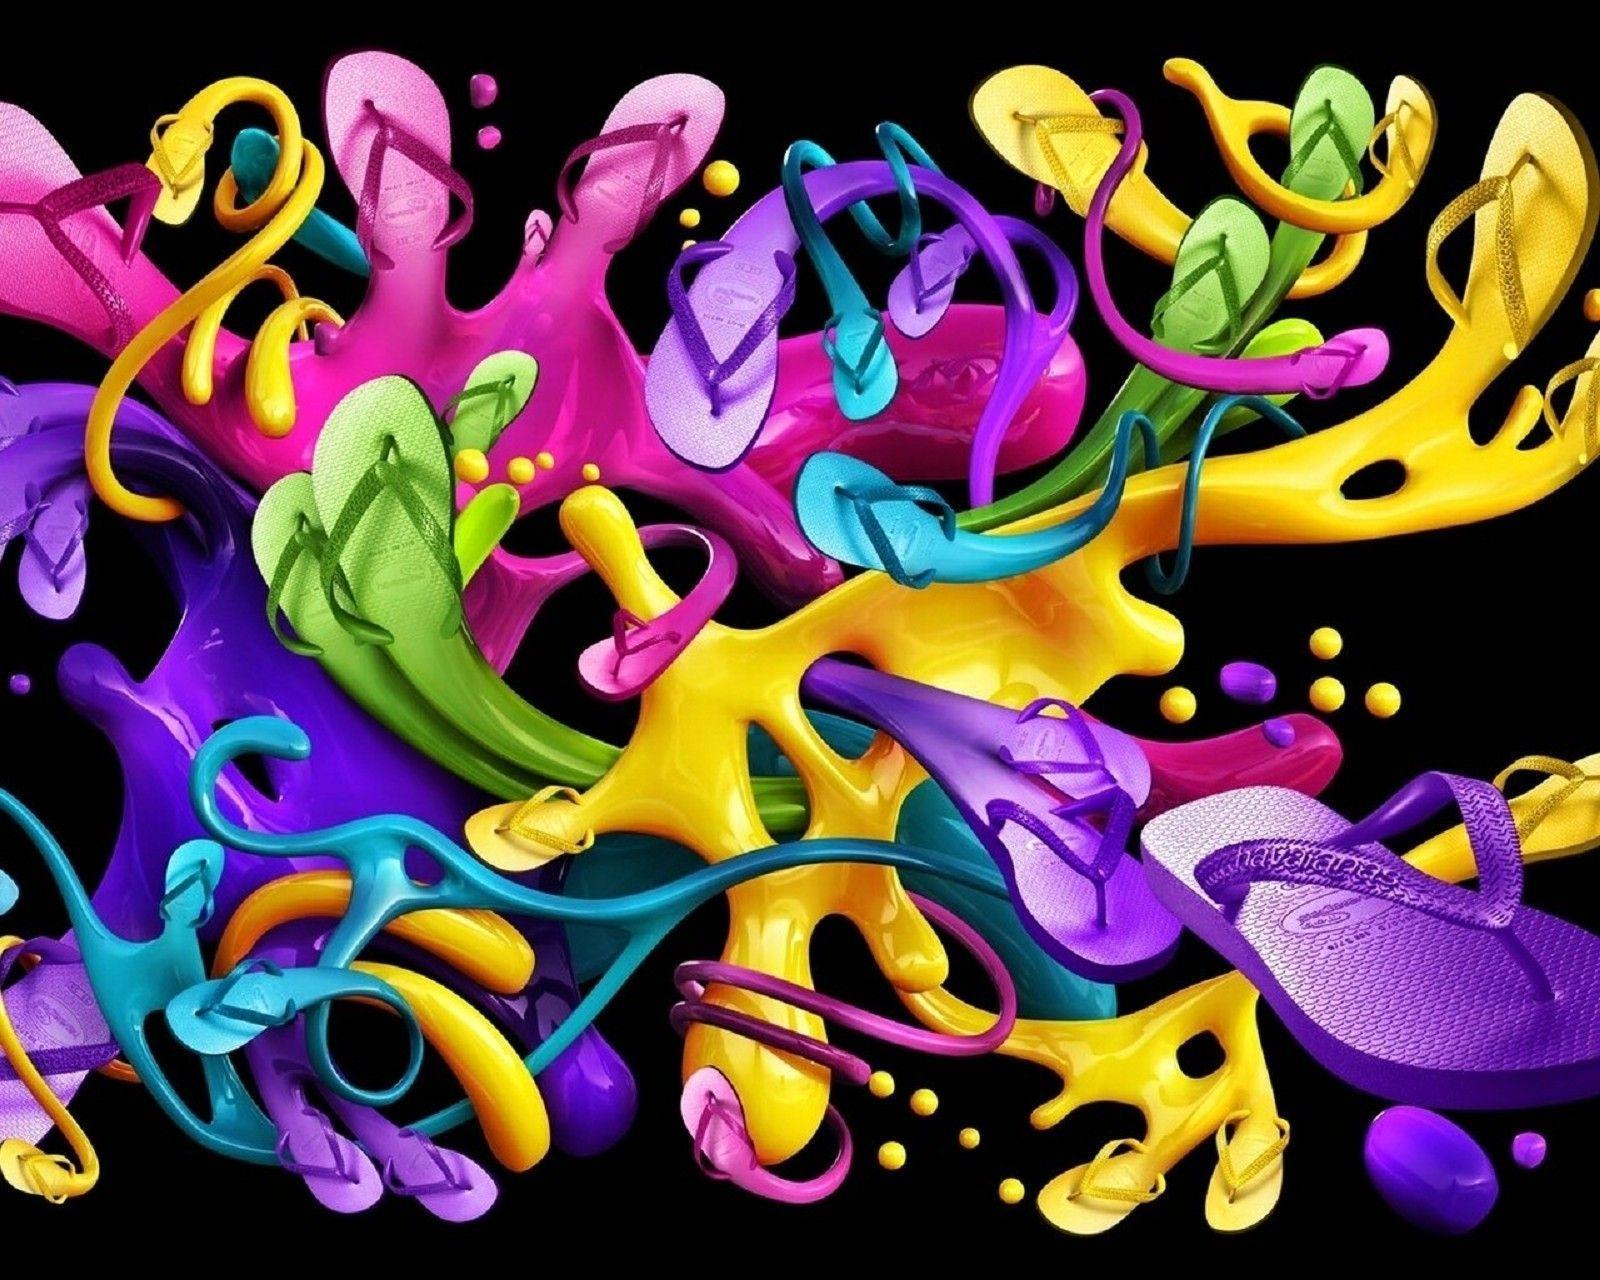 Cool Abstract Designs 2014 Free 15 HD Wallpaper